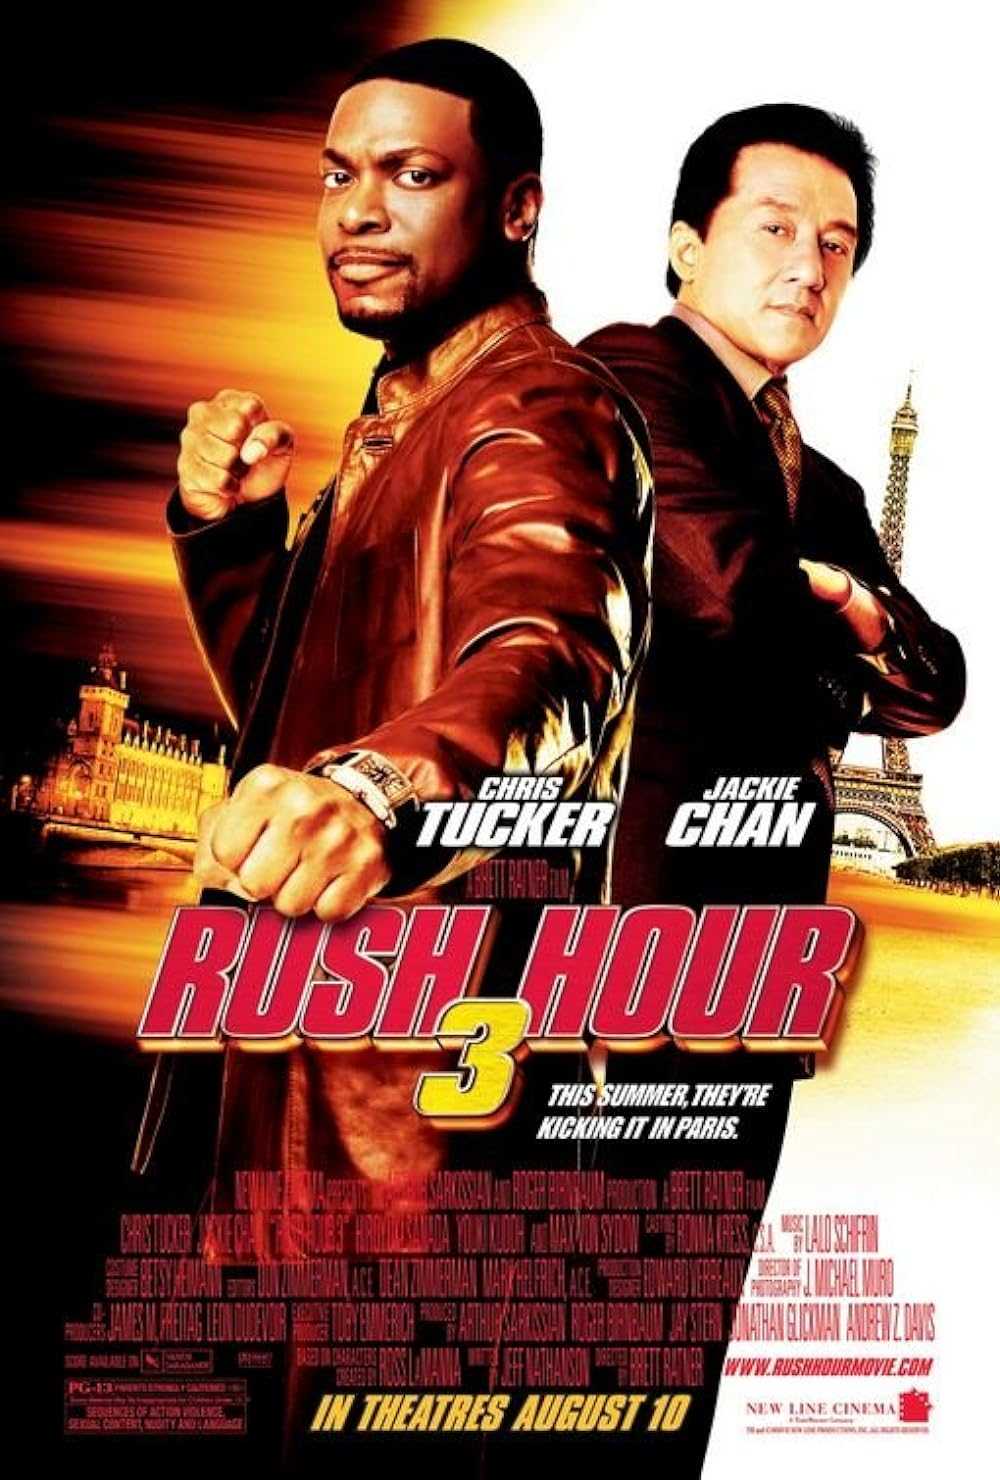 Featured picture for the movie; RUSH HOUR 3 B - SANKRA 